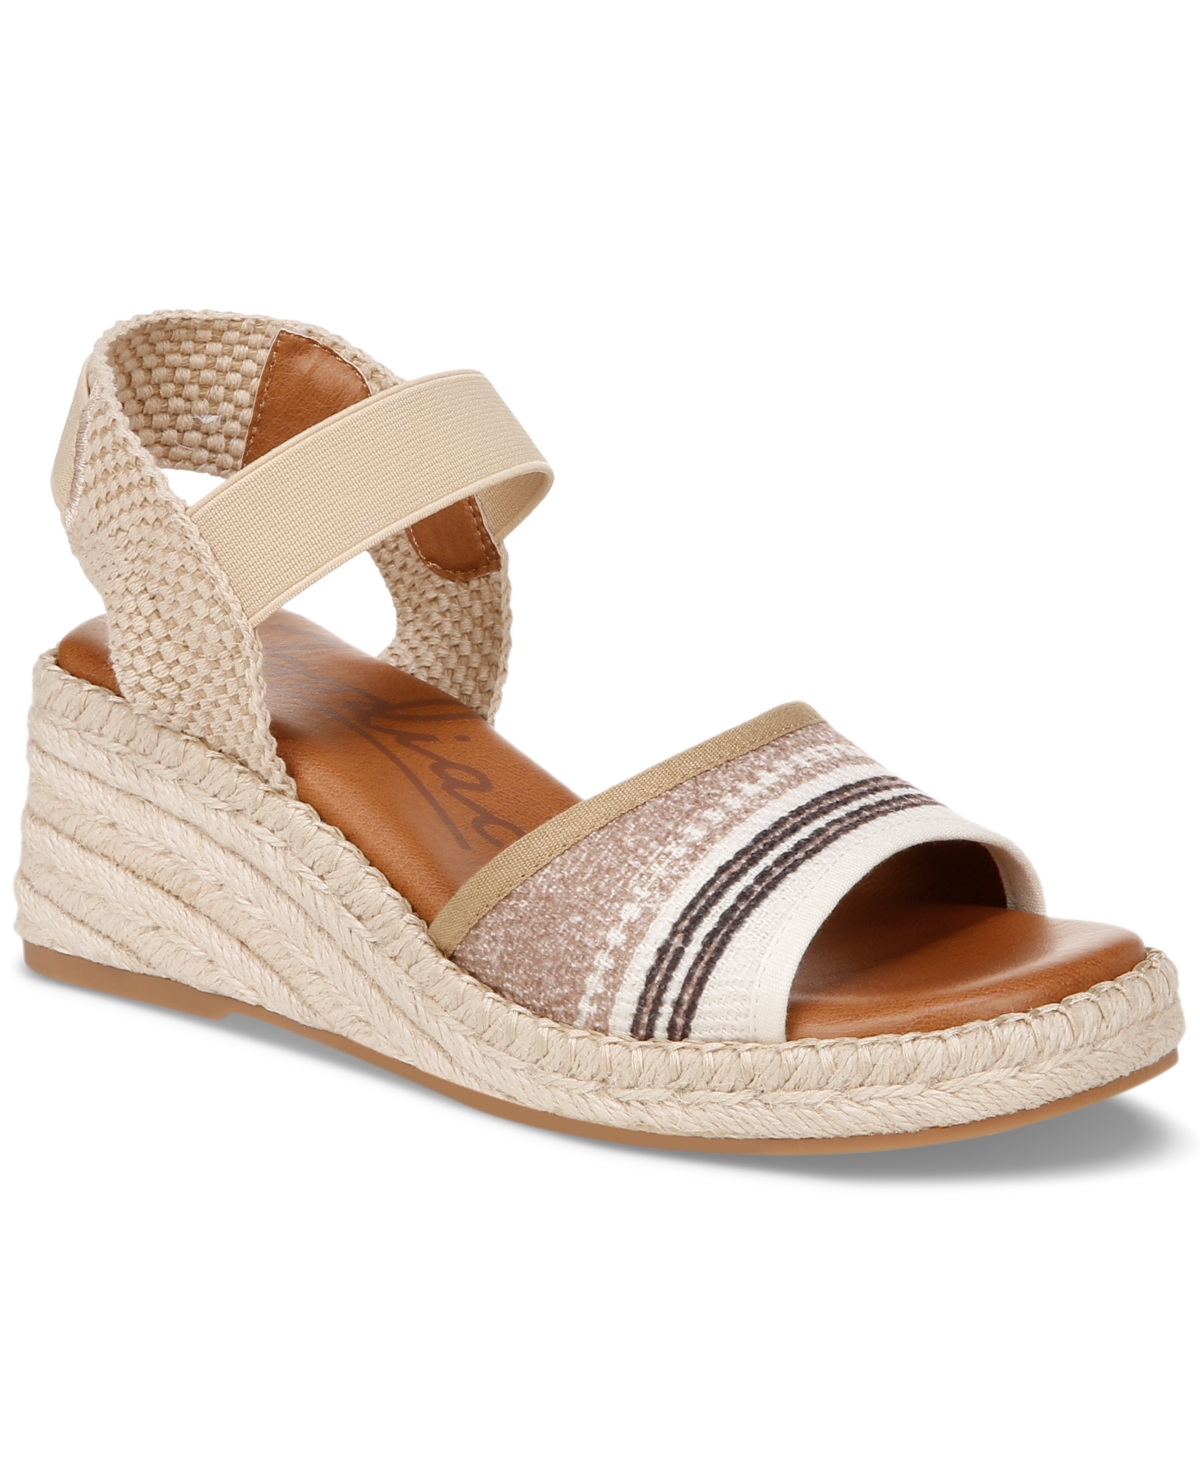 Women's Noreen Ankle-Strap Espadrille Wedge Sandals - Pink